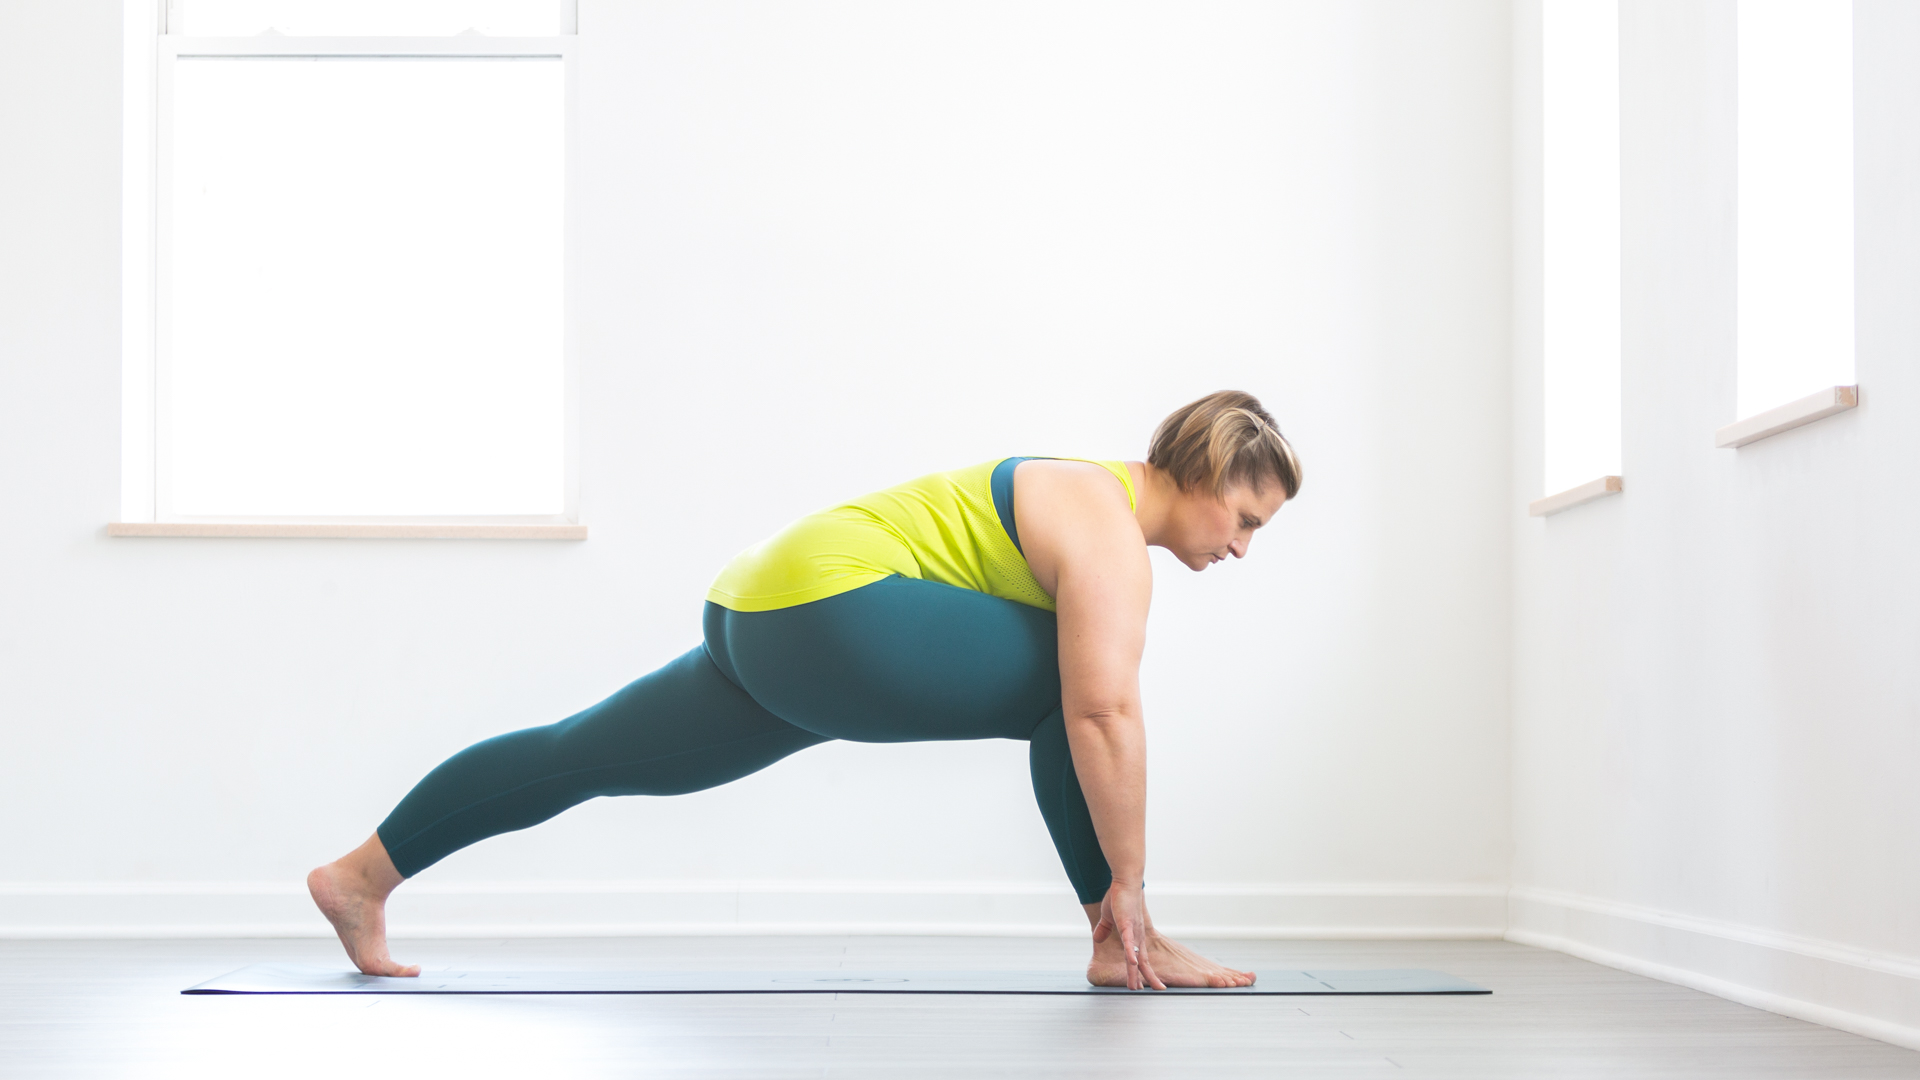 Right Half Pigeon Pose by Jataesha C. - Exercise How-to - Skimble